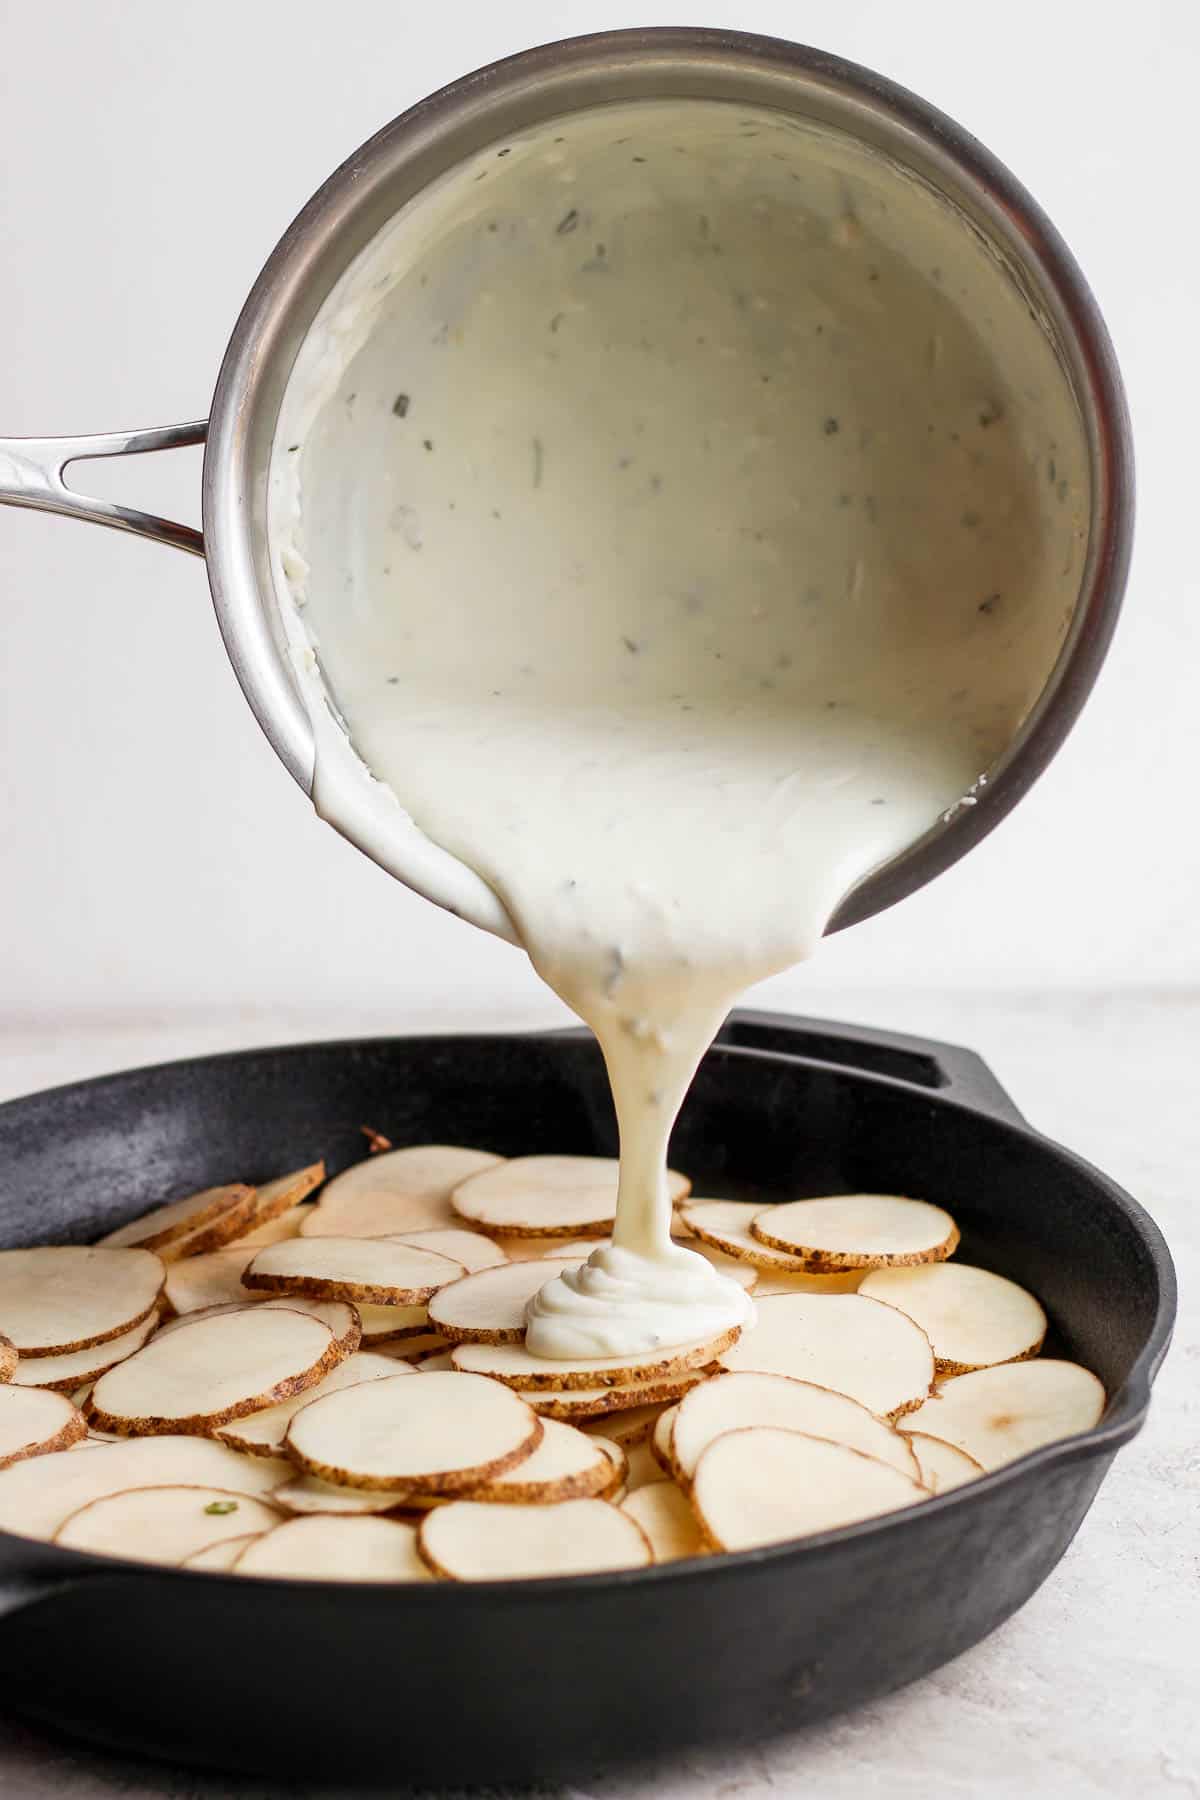 The cheese sauce being poured over the sliced potatoes in a cast iron skillet.